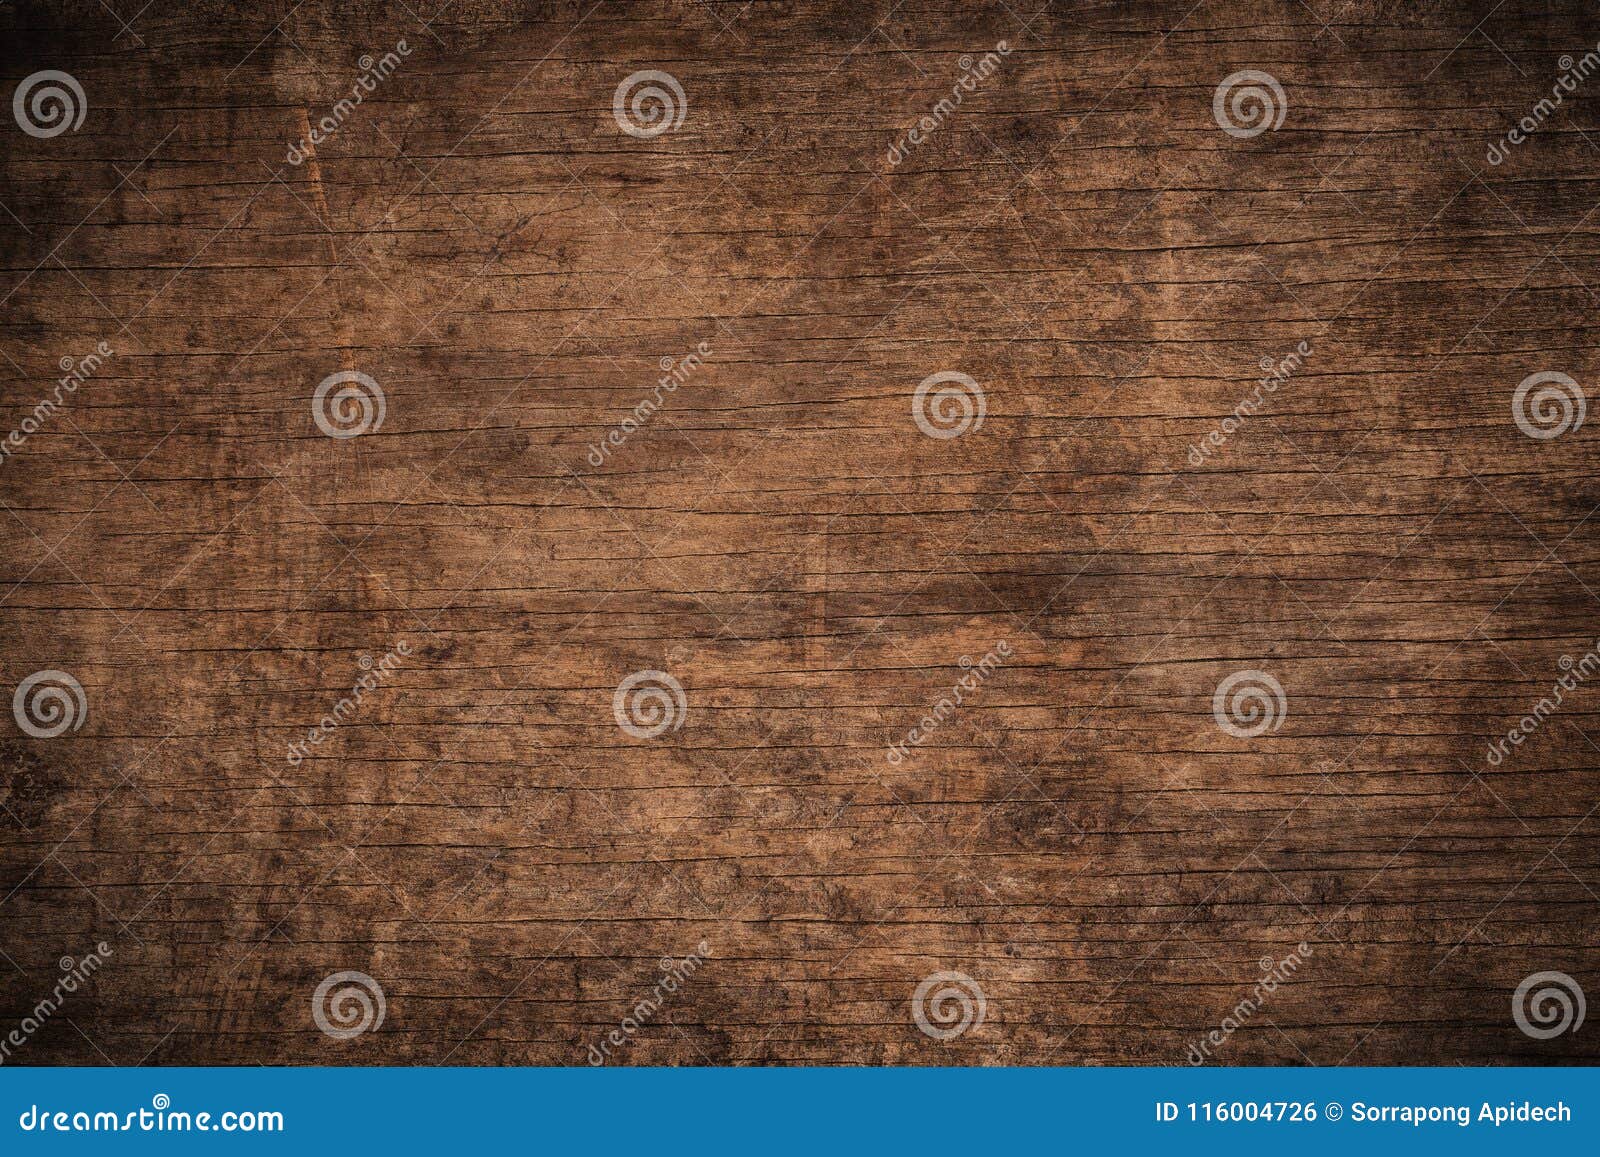 old grunge dark textured wooden background,the surface of the old brown wood texture,top view brown wood paneling